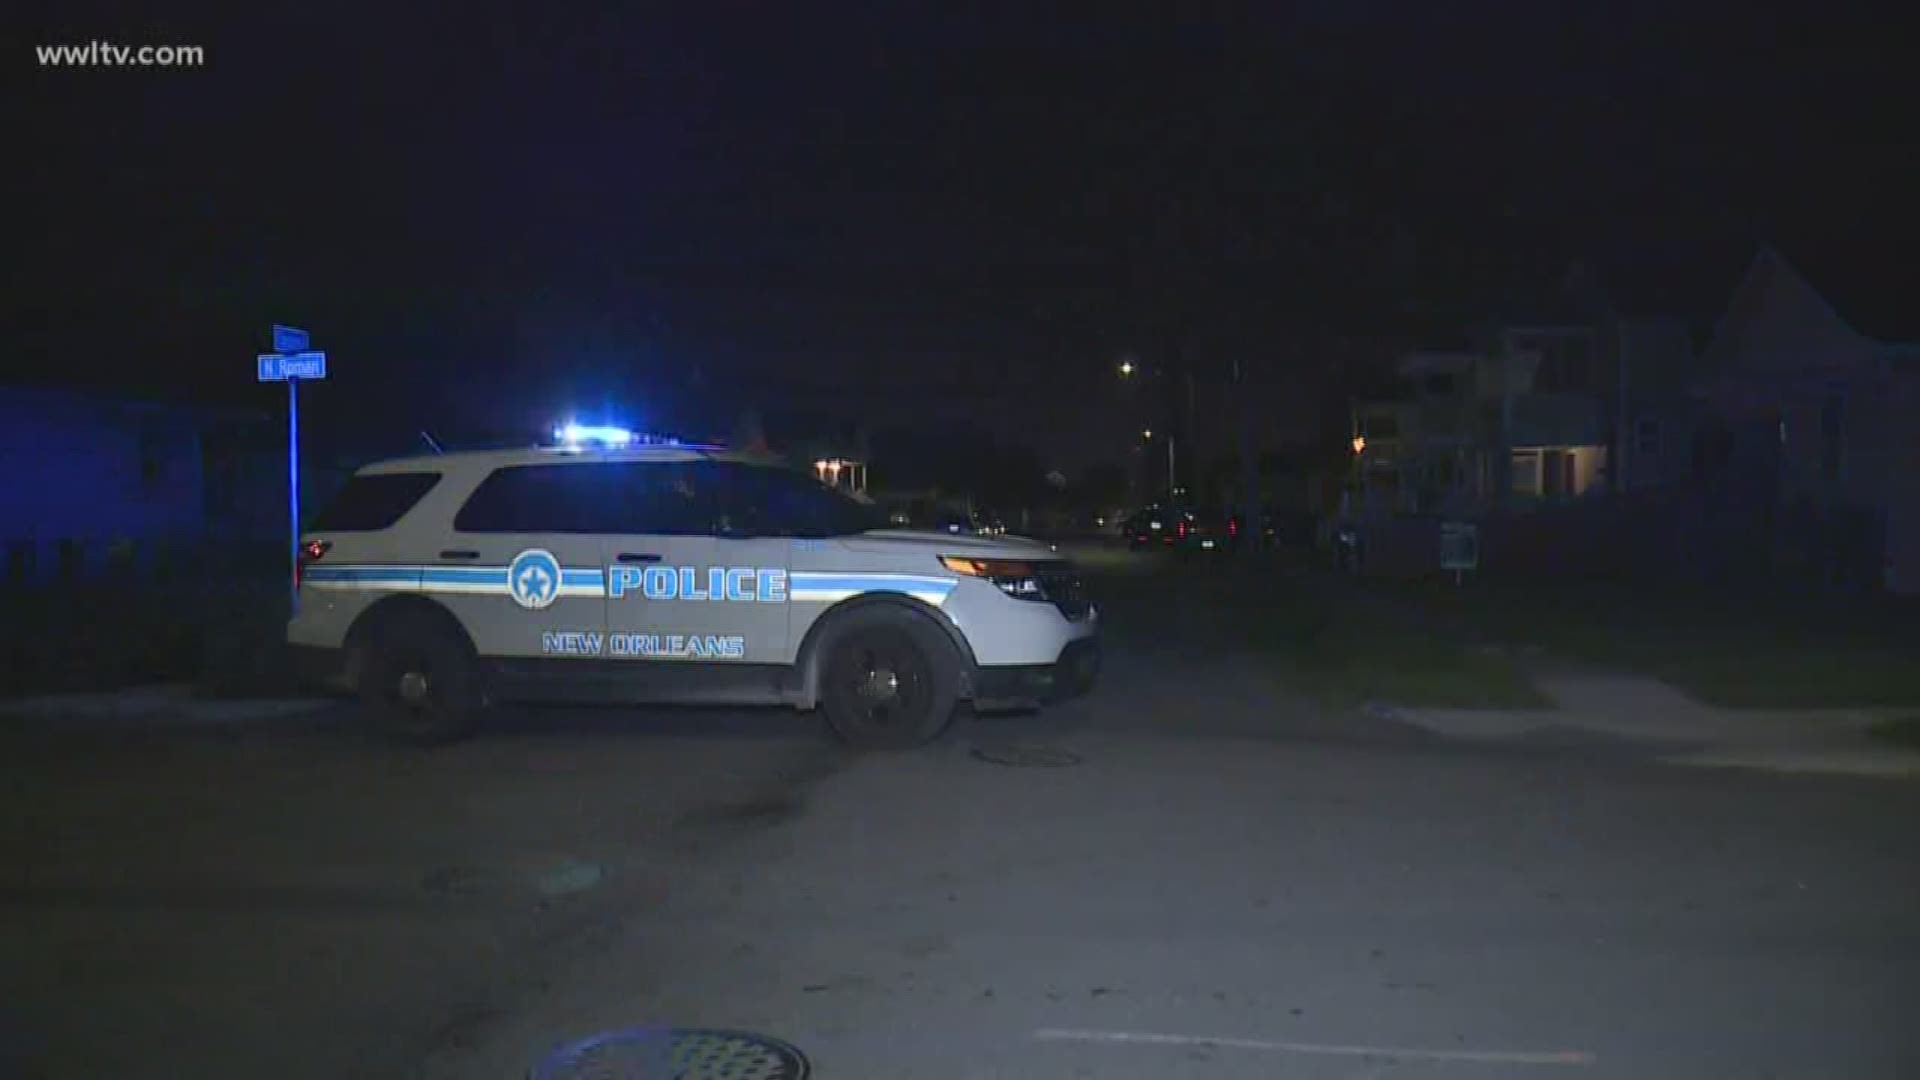 One person has died and another is injured after a Friday night shooting in the St. Claude neighborhood, NOPD officials said.